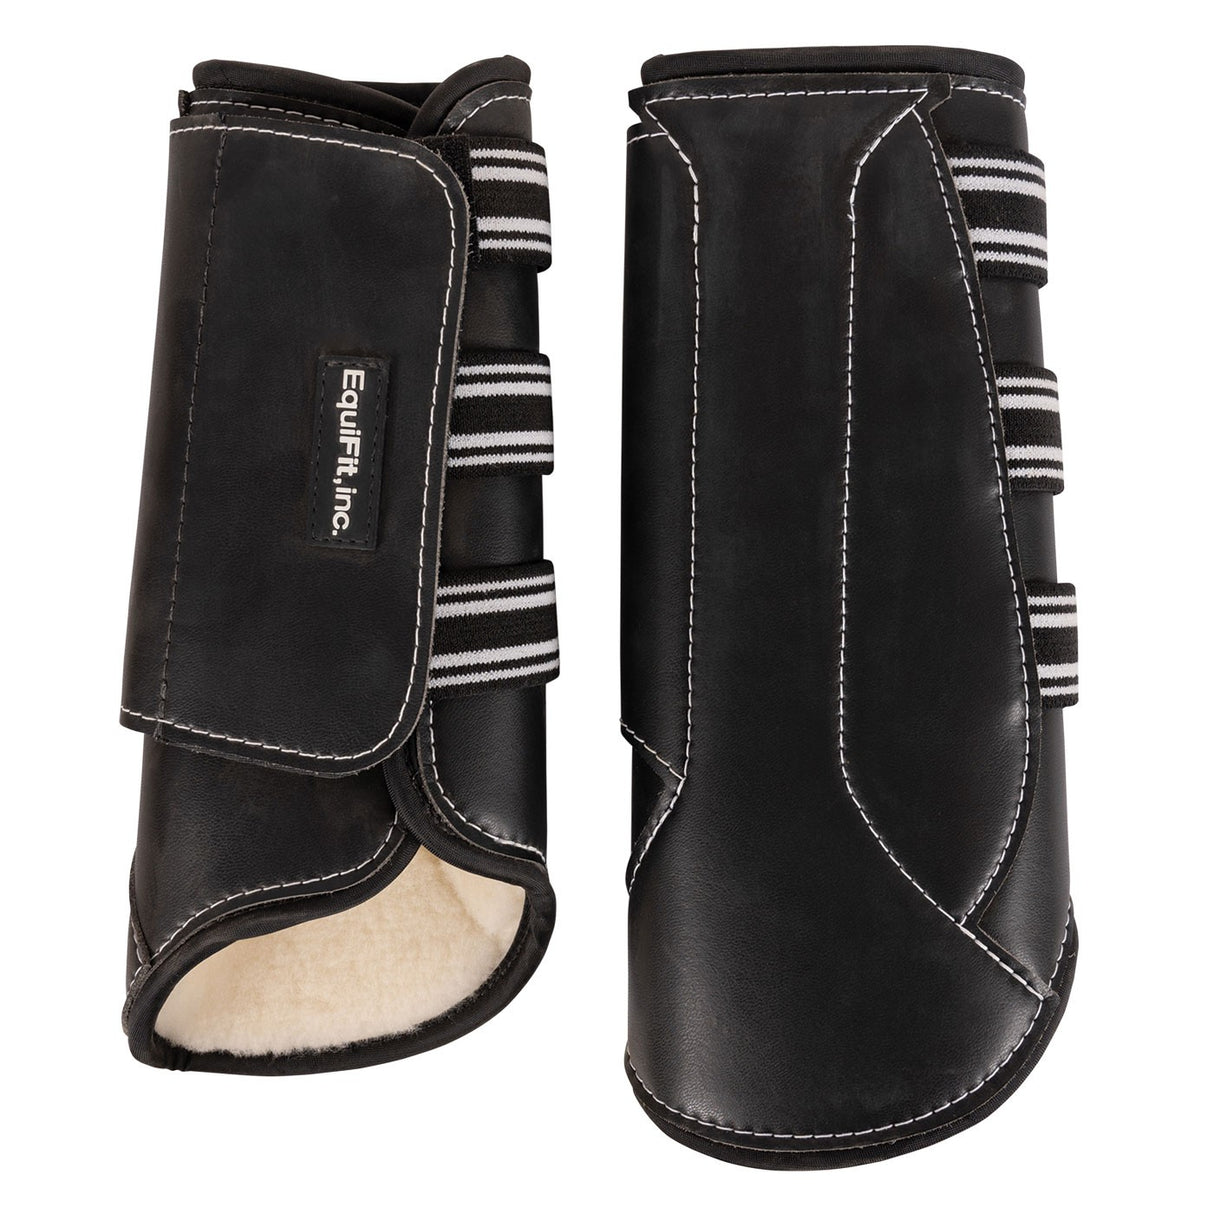 EquiFit MultiTeq Sheepswool Tall Hind Boots